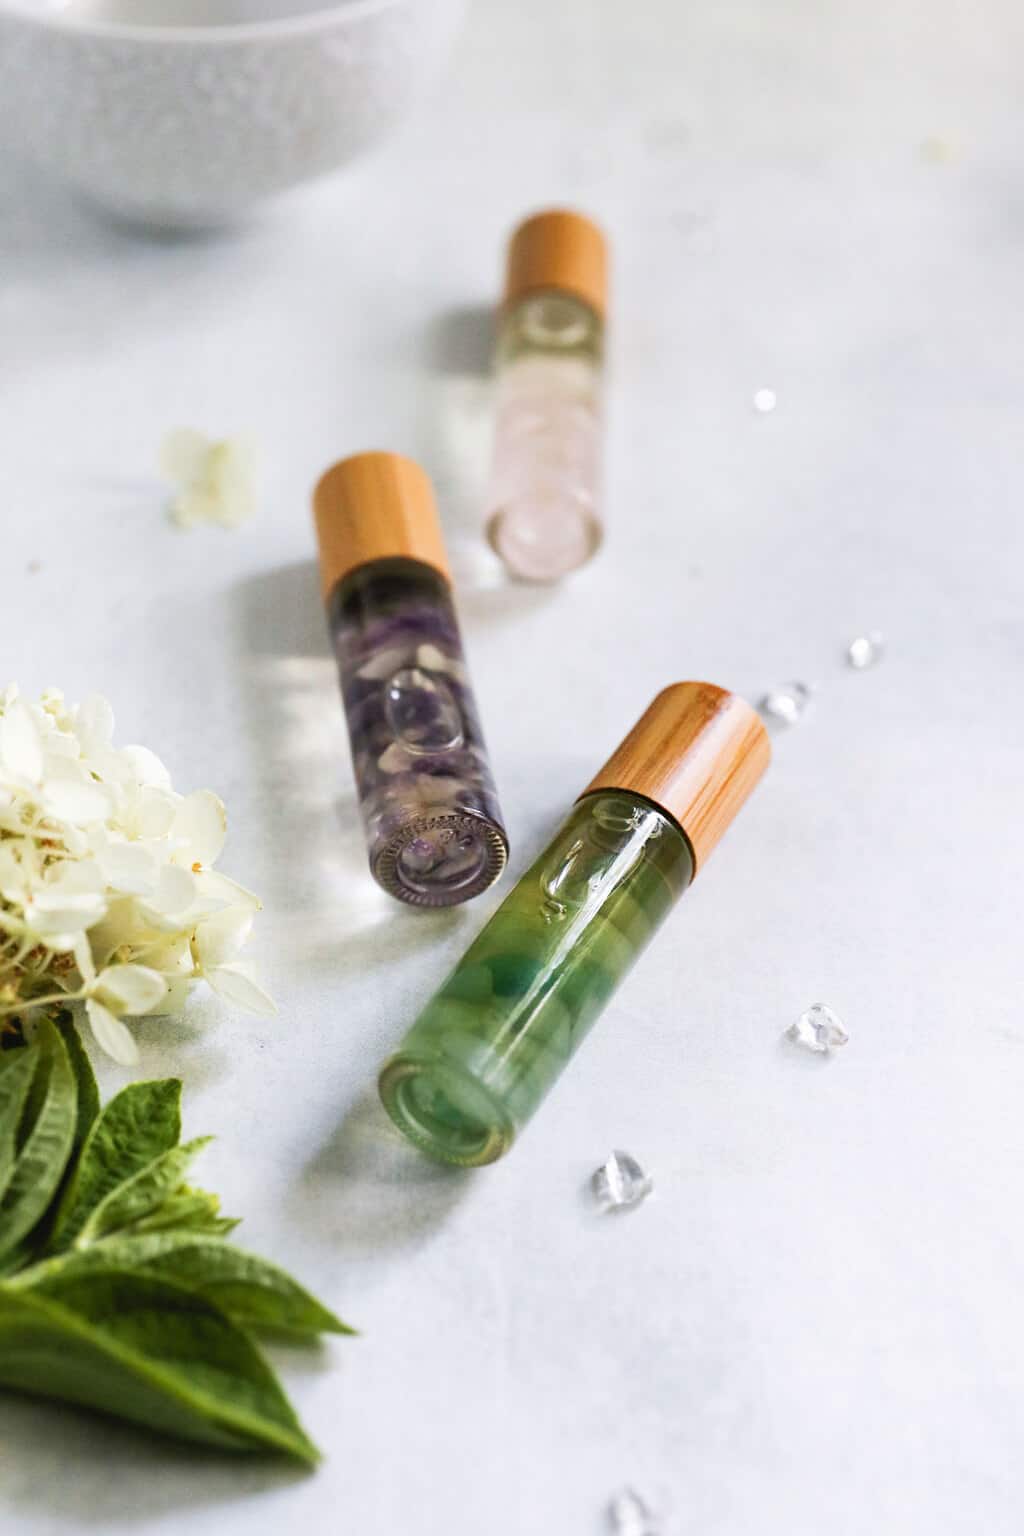 How To Make Essential Oil Perfume (+ 12 Recipe Blends)